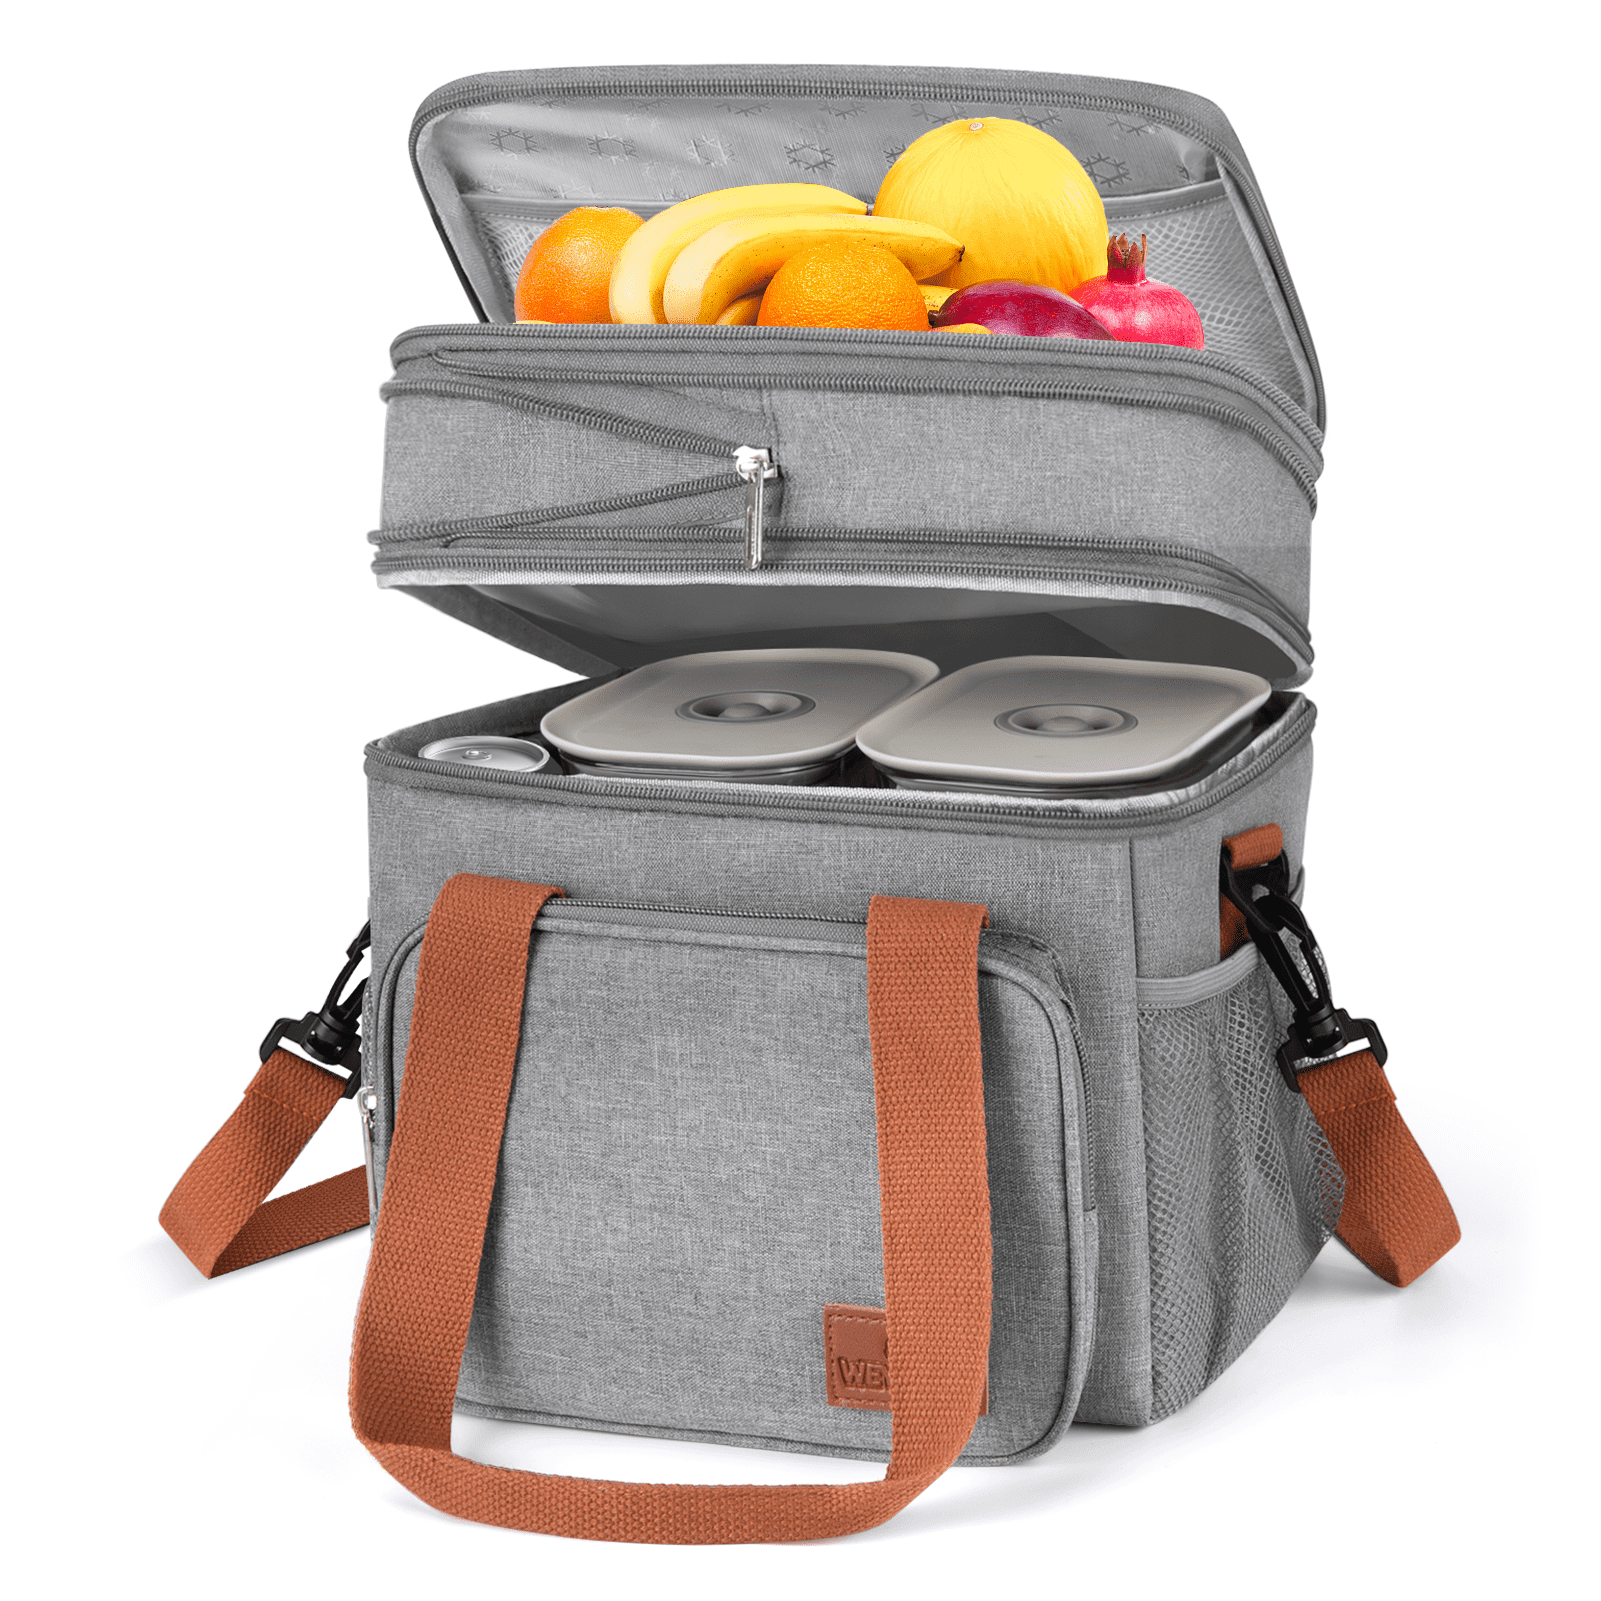 The Munchie Bag - Insulated Lunch Bag with Strap